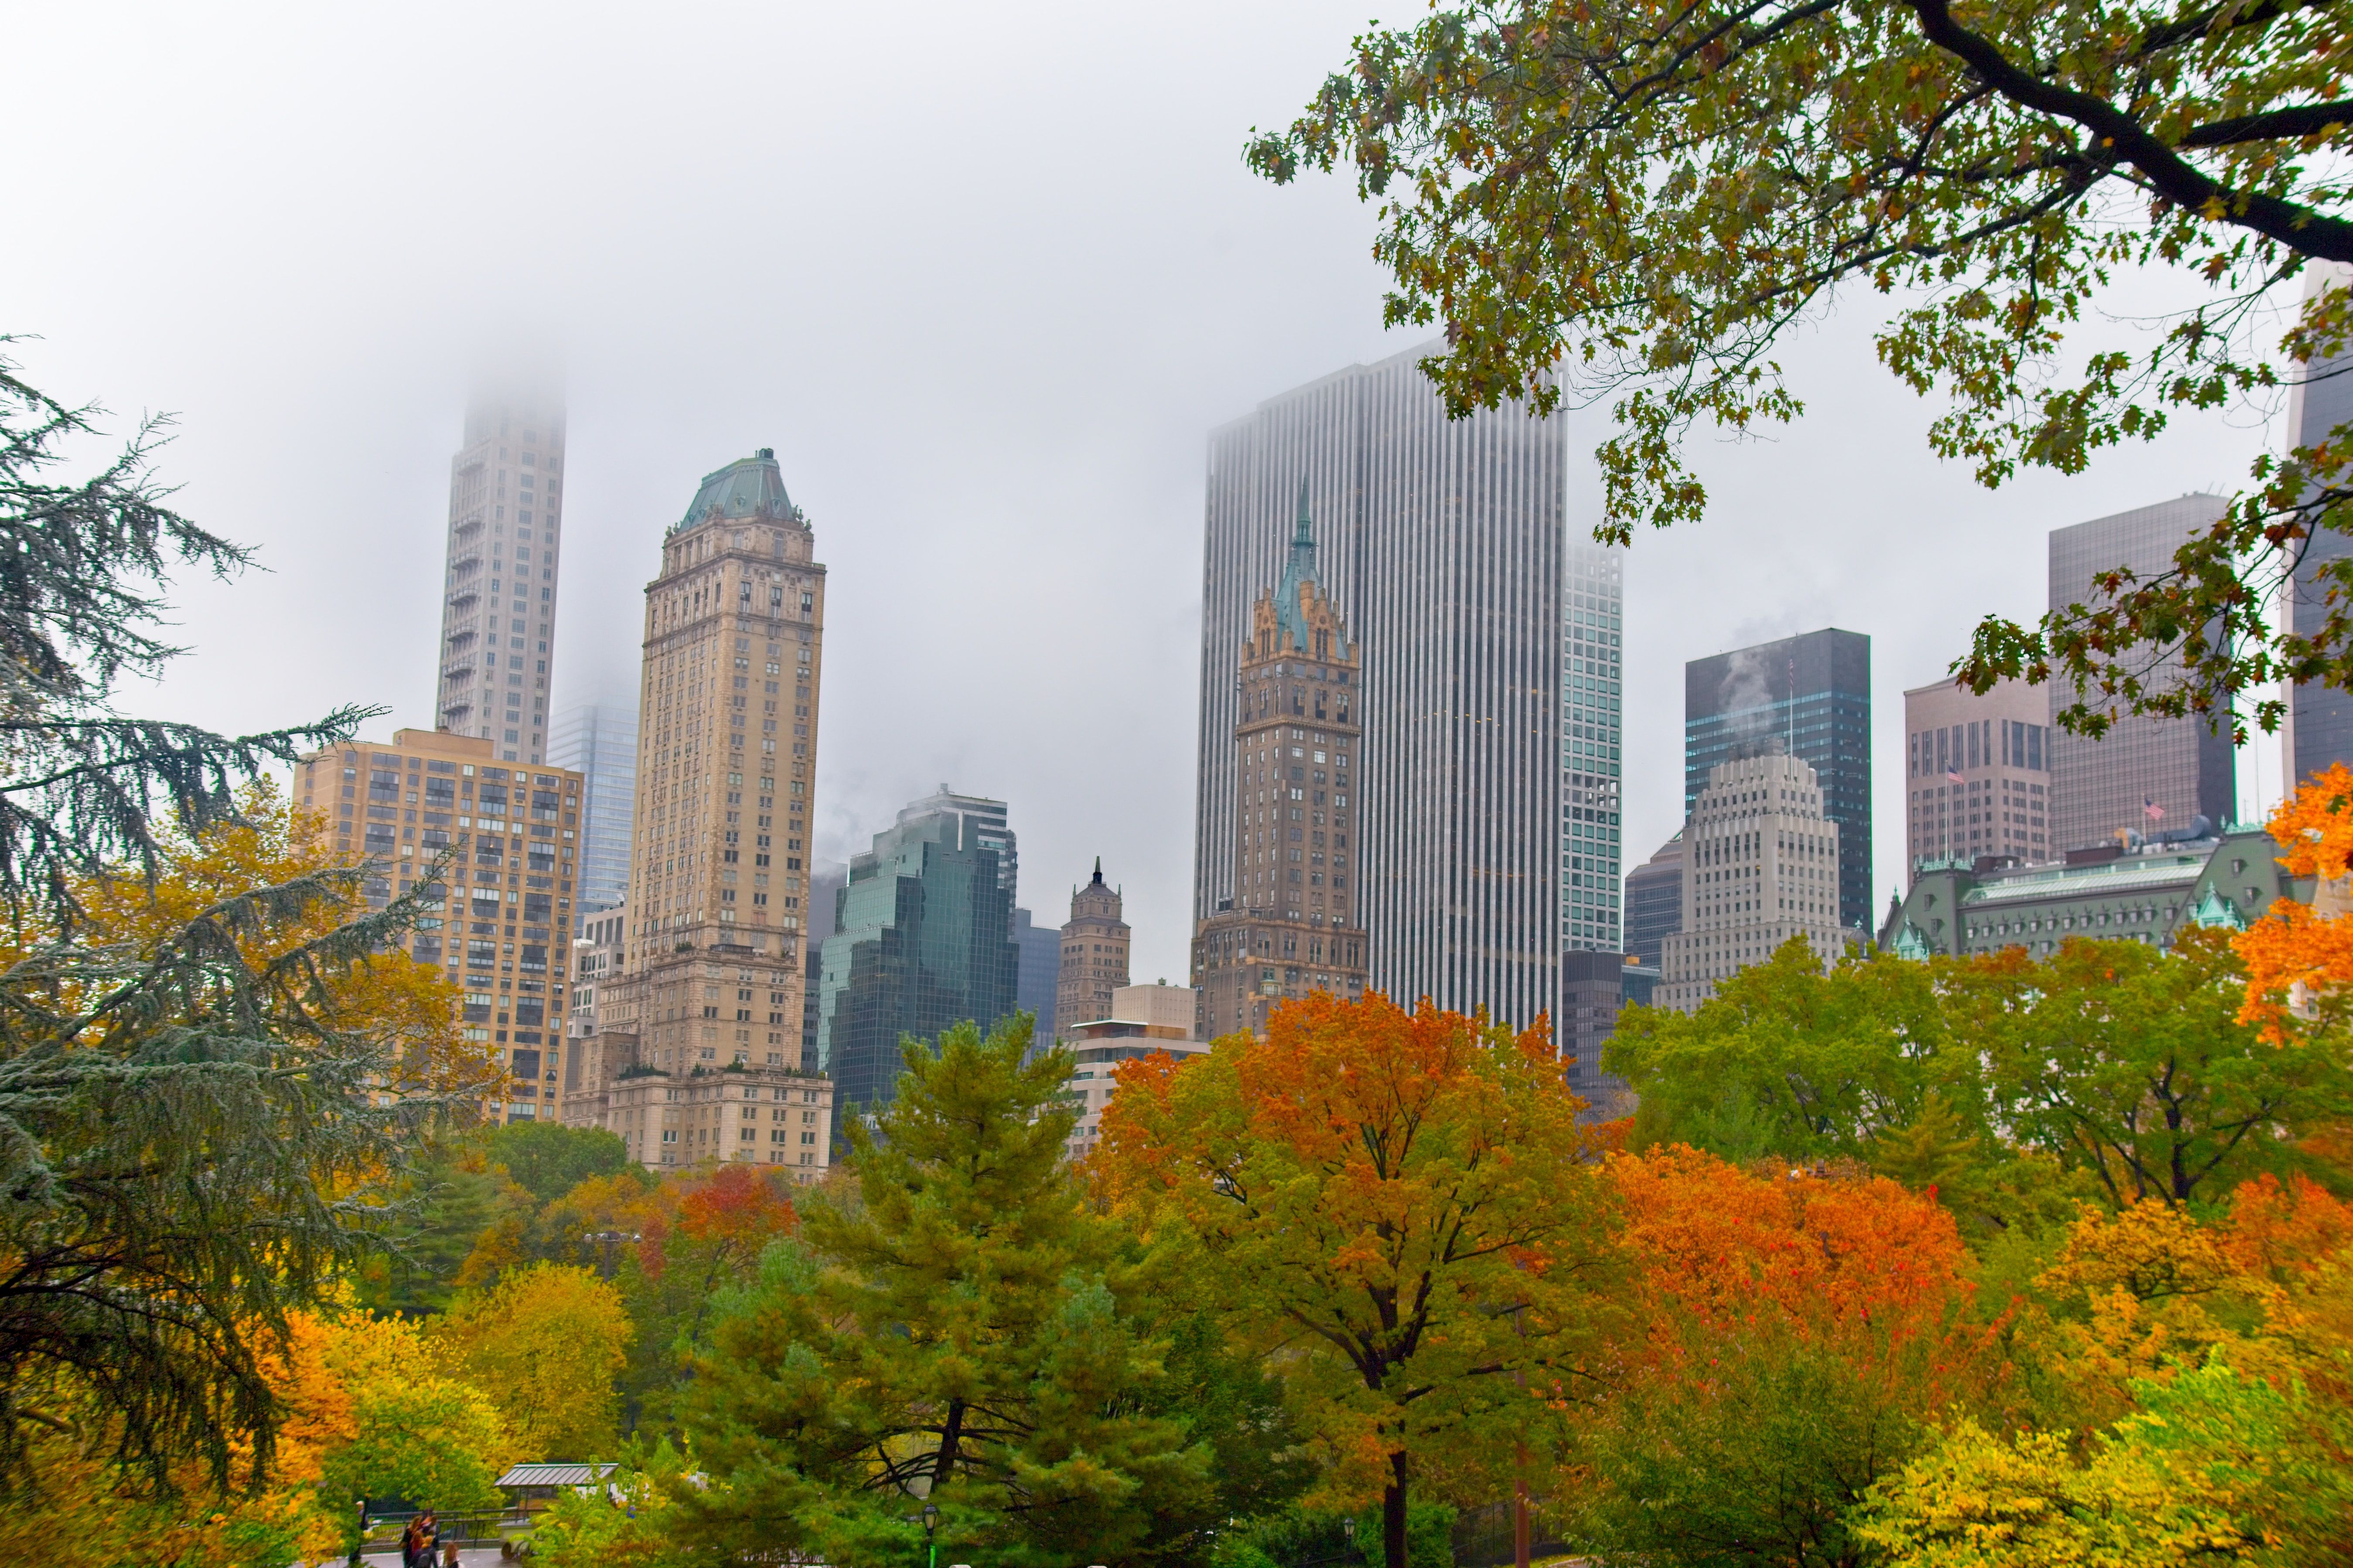 Live out your 'When Harry Met Sally' fantasy in Central Park West.